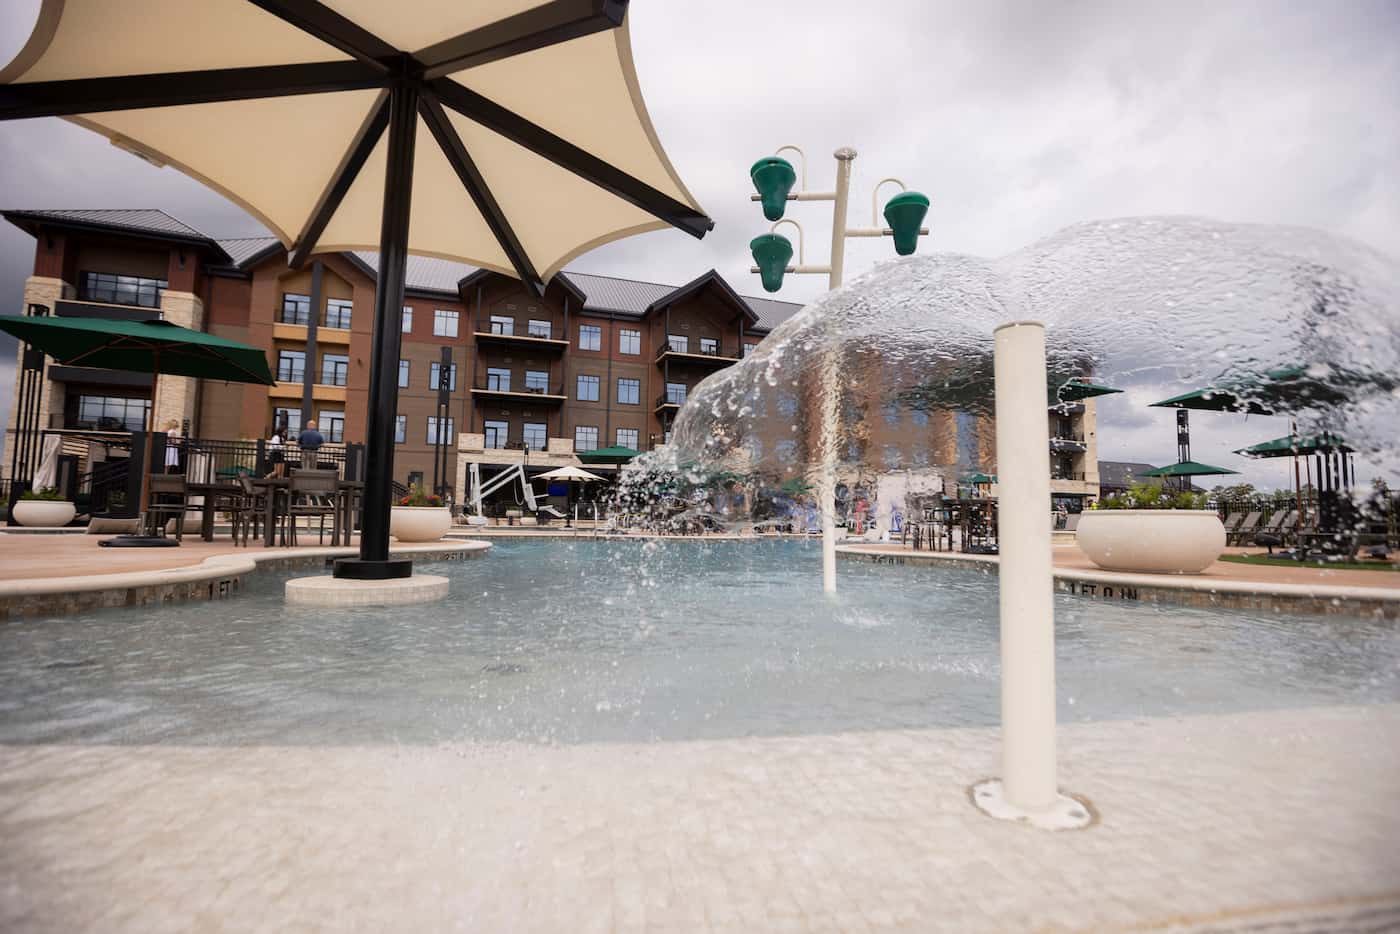 The pool area at Choctaw Landing photographed during a media day on Wednesday, April 24,...